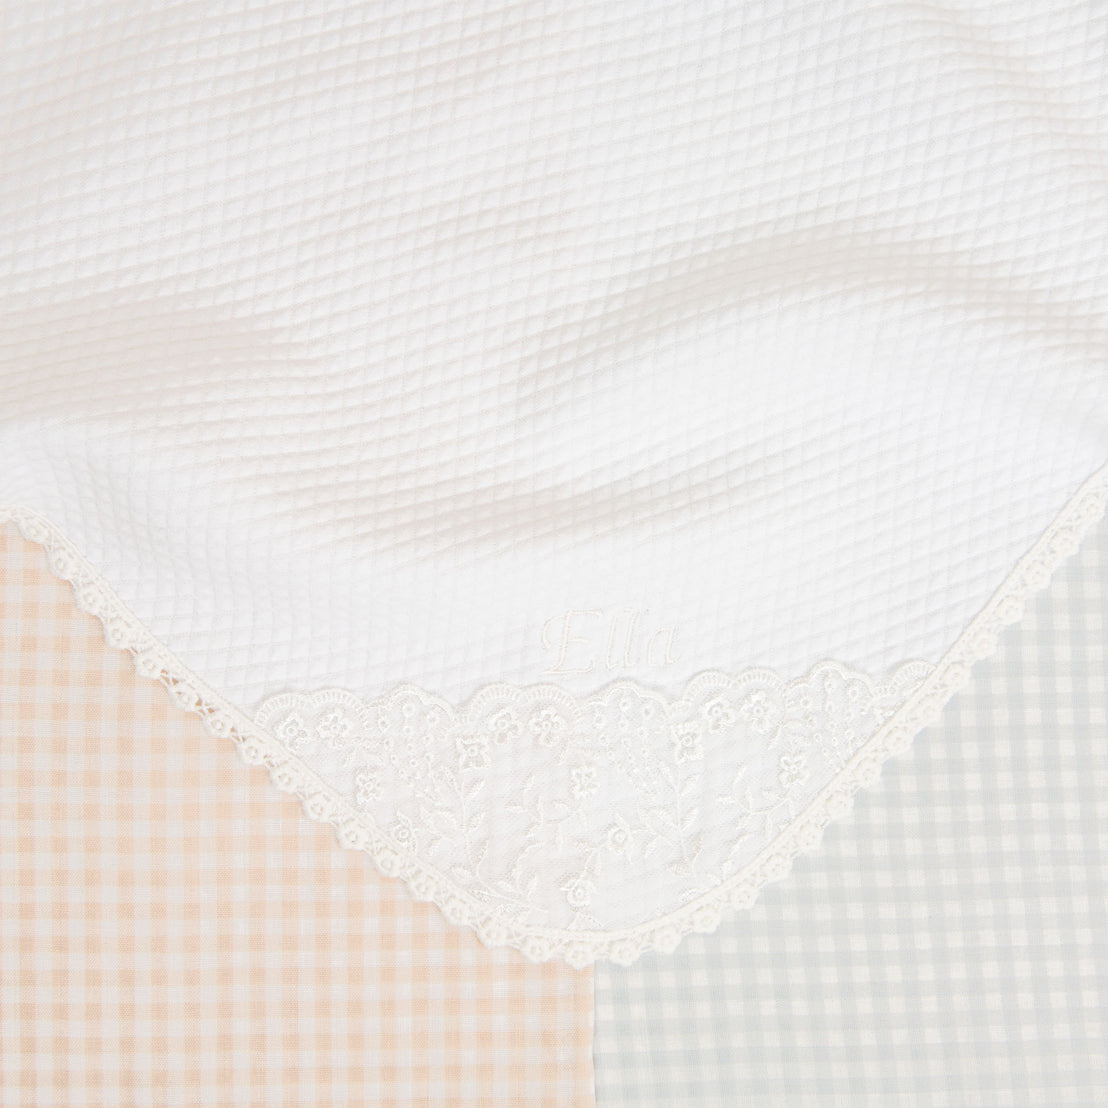 Close-up of a traditional white embroidered Isla Personalized Blanket with a floral pattern and the name "ella" embroidered, designed as an heirloom for a newborn, against a backdrop of checkered fabric in soft.